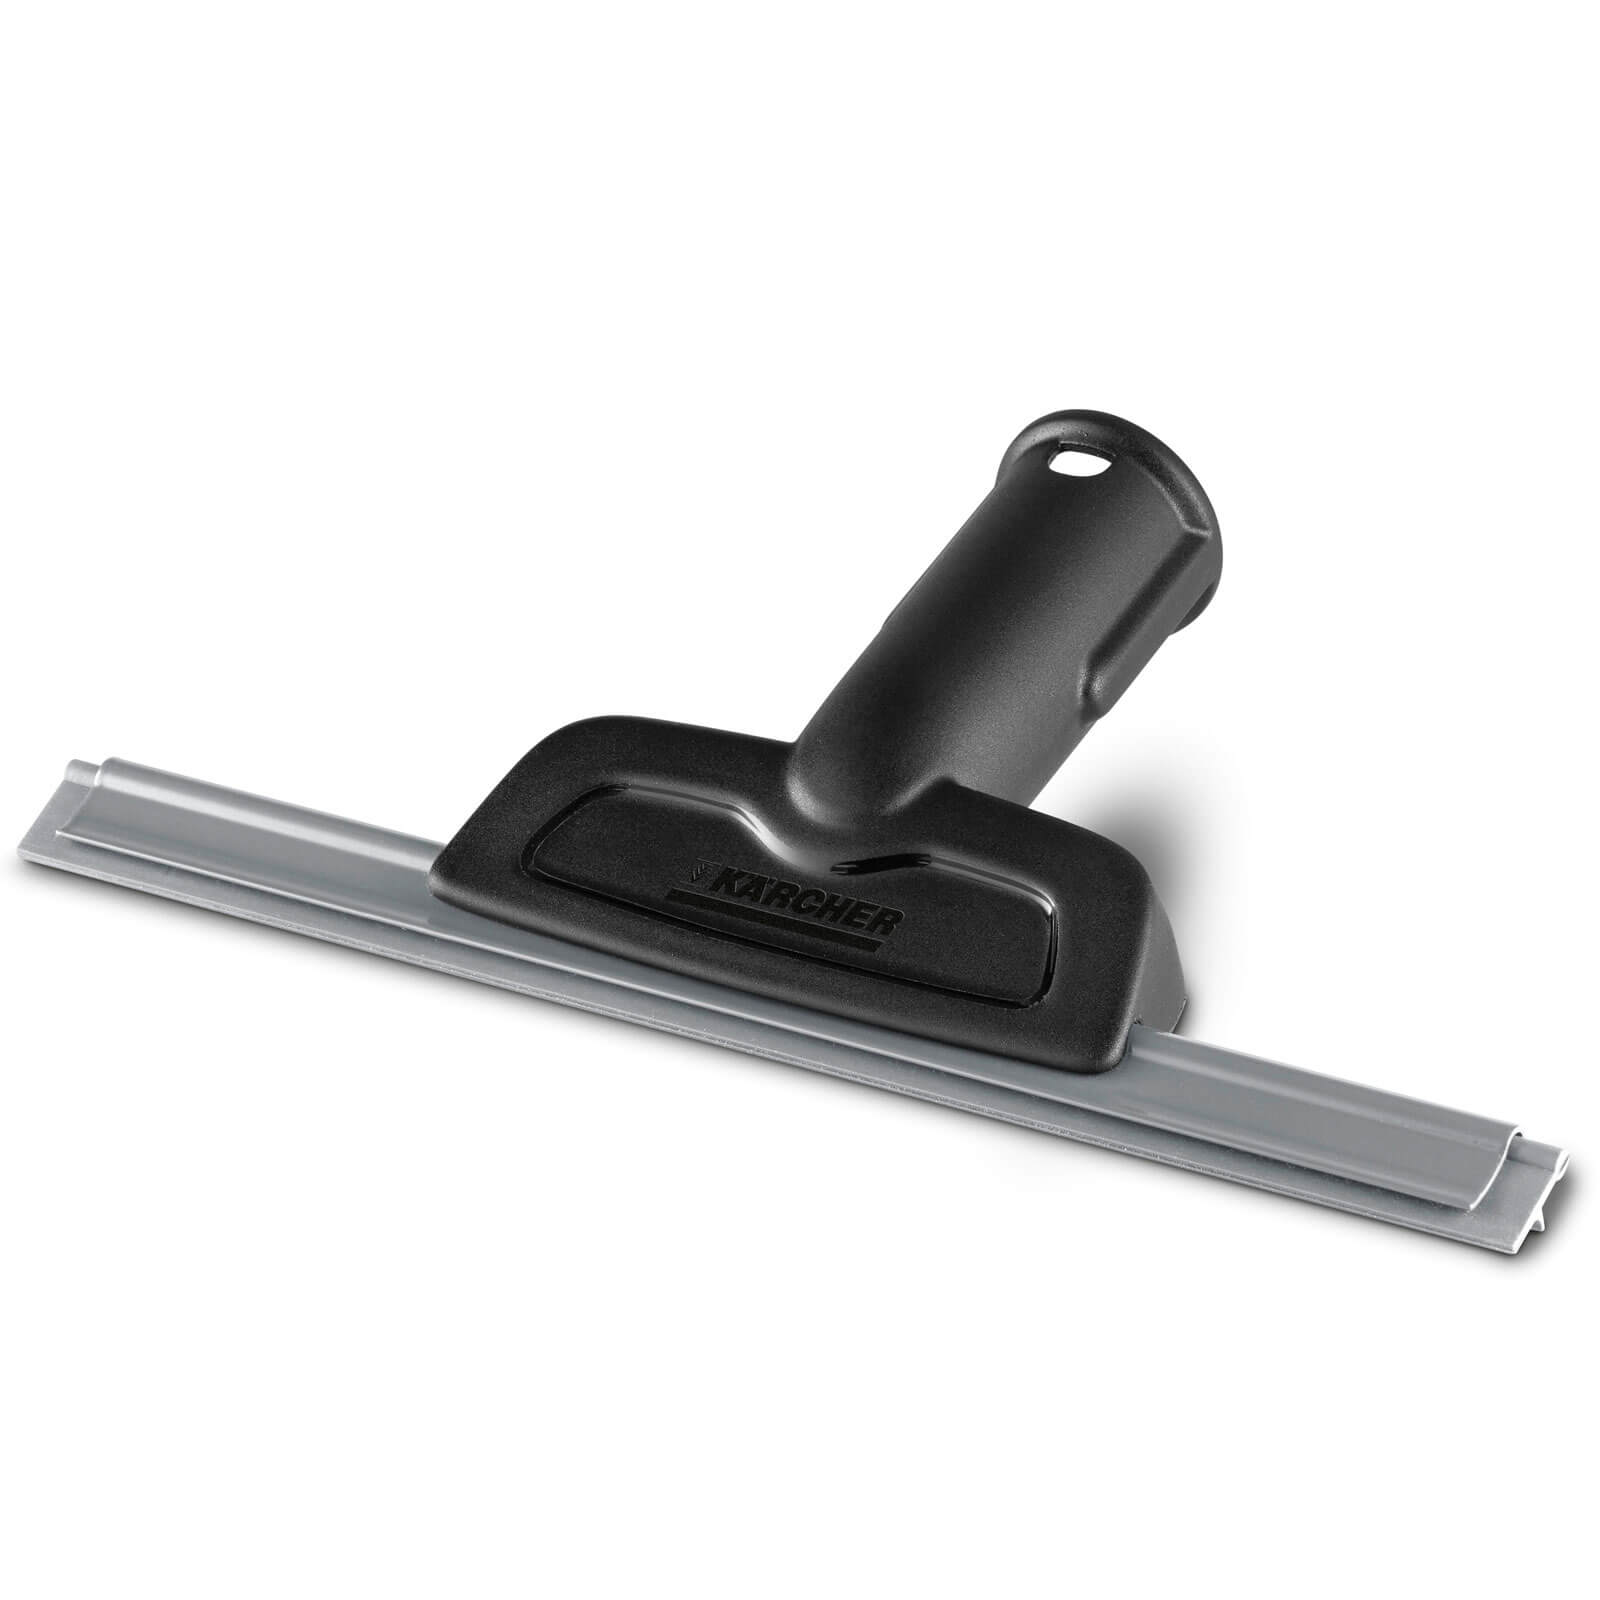 Image of Karcher Window Tool for SC, DE and SG Steam Cleaners